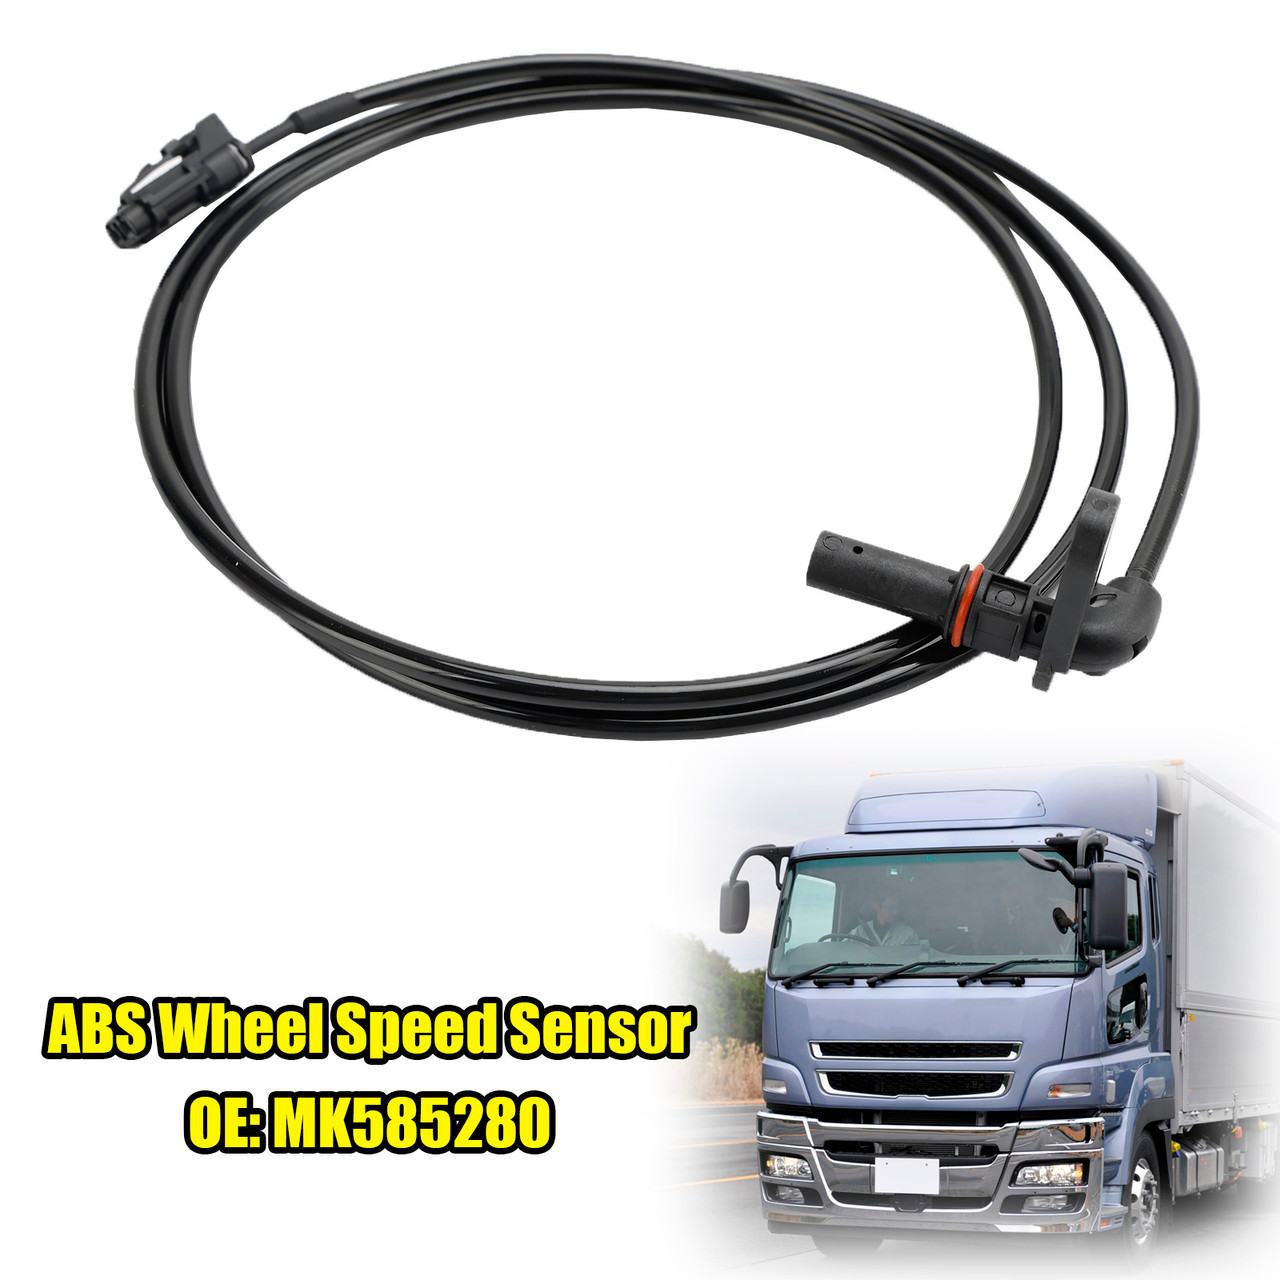 ABS Wheel Speed Sensor Rear Right For Mitsubishi Fuso Canter 3.0 MK585280